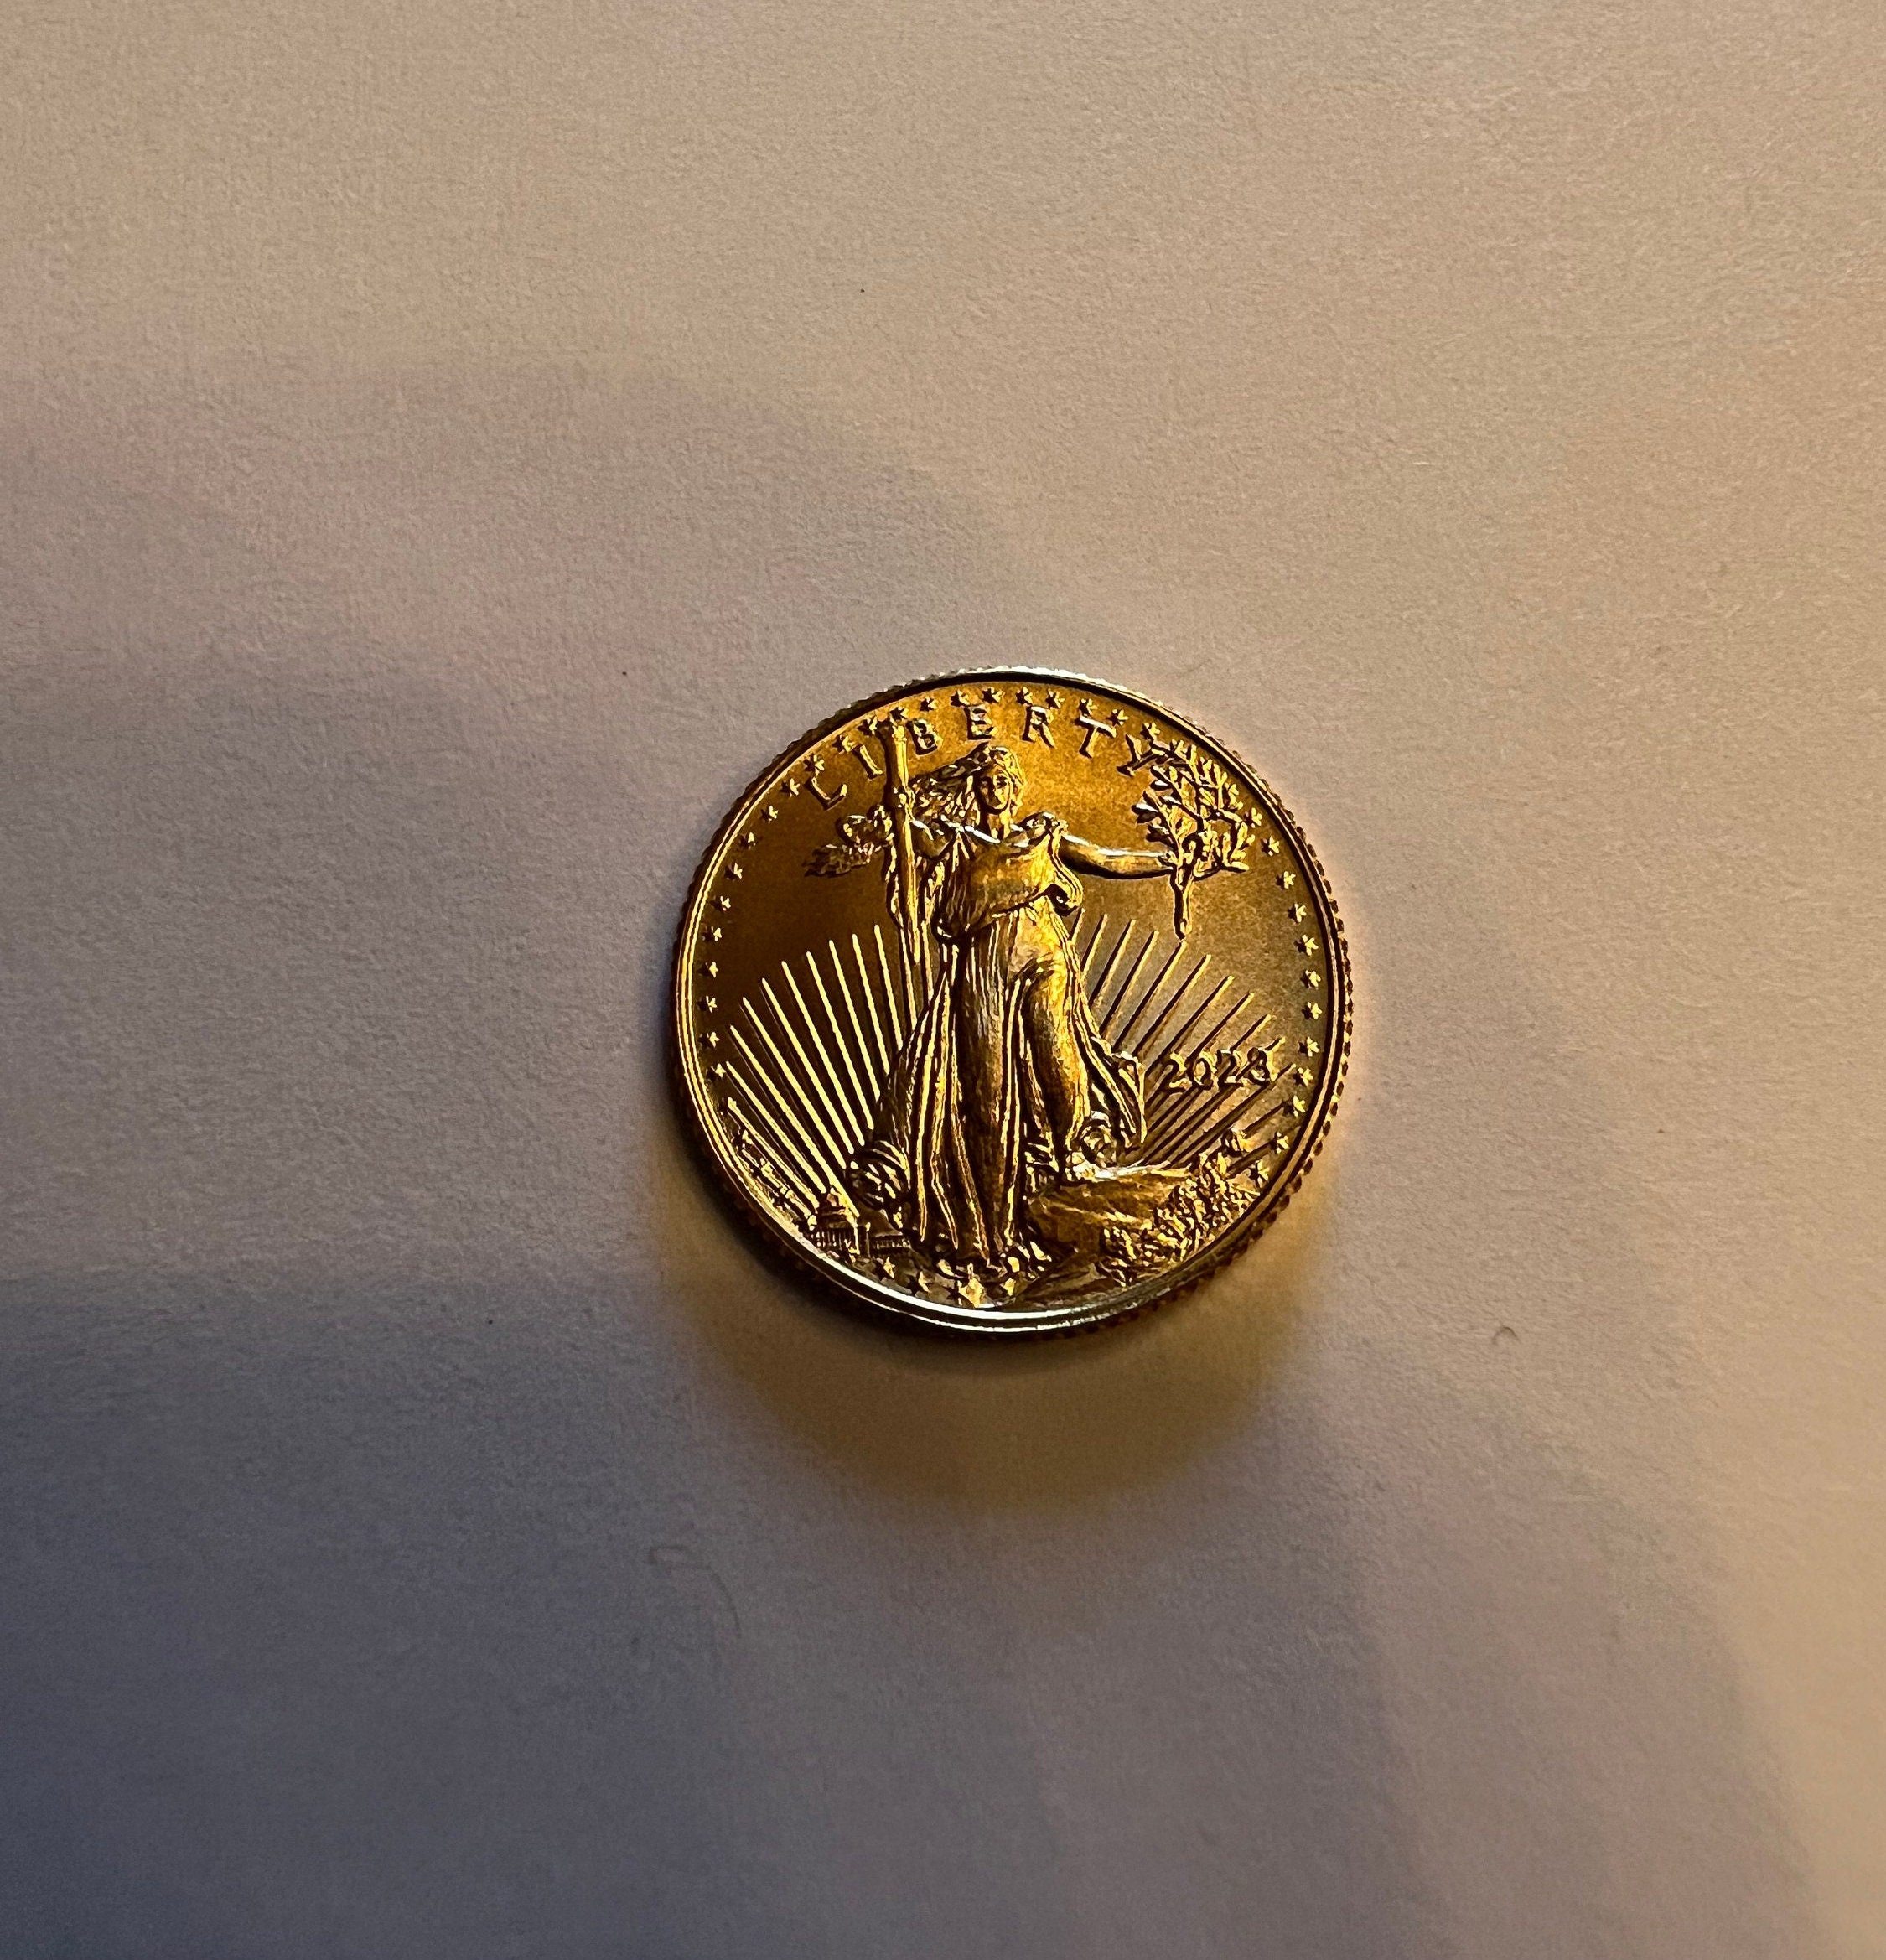 Coin Ping Test - British Sovereign vs 1/4 American Gold Eagle. Is it the  Silver? I think so. 